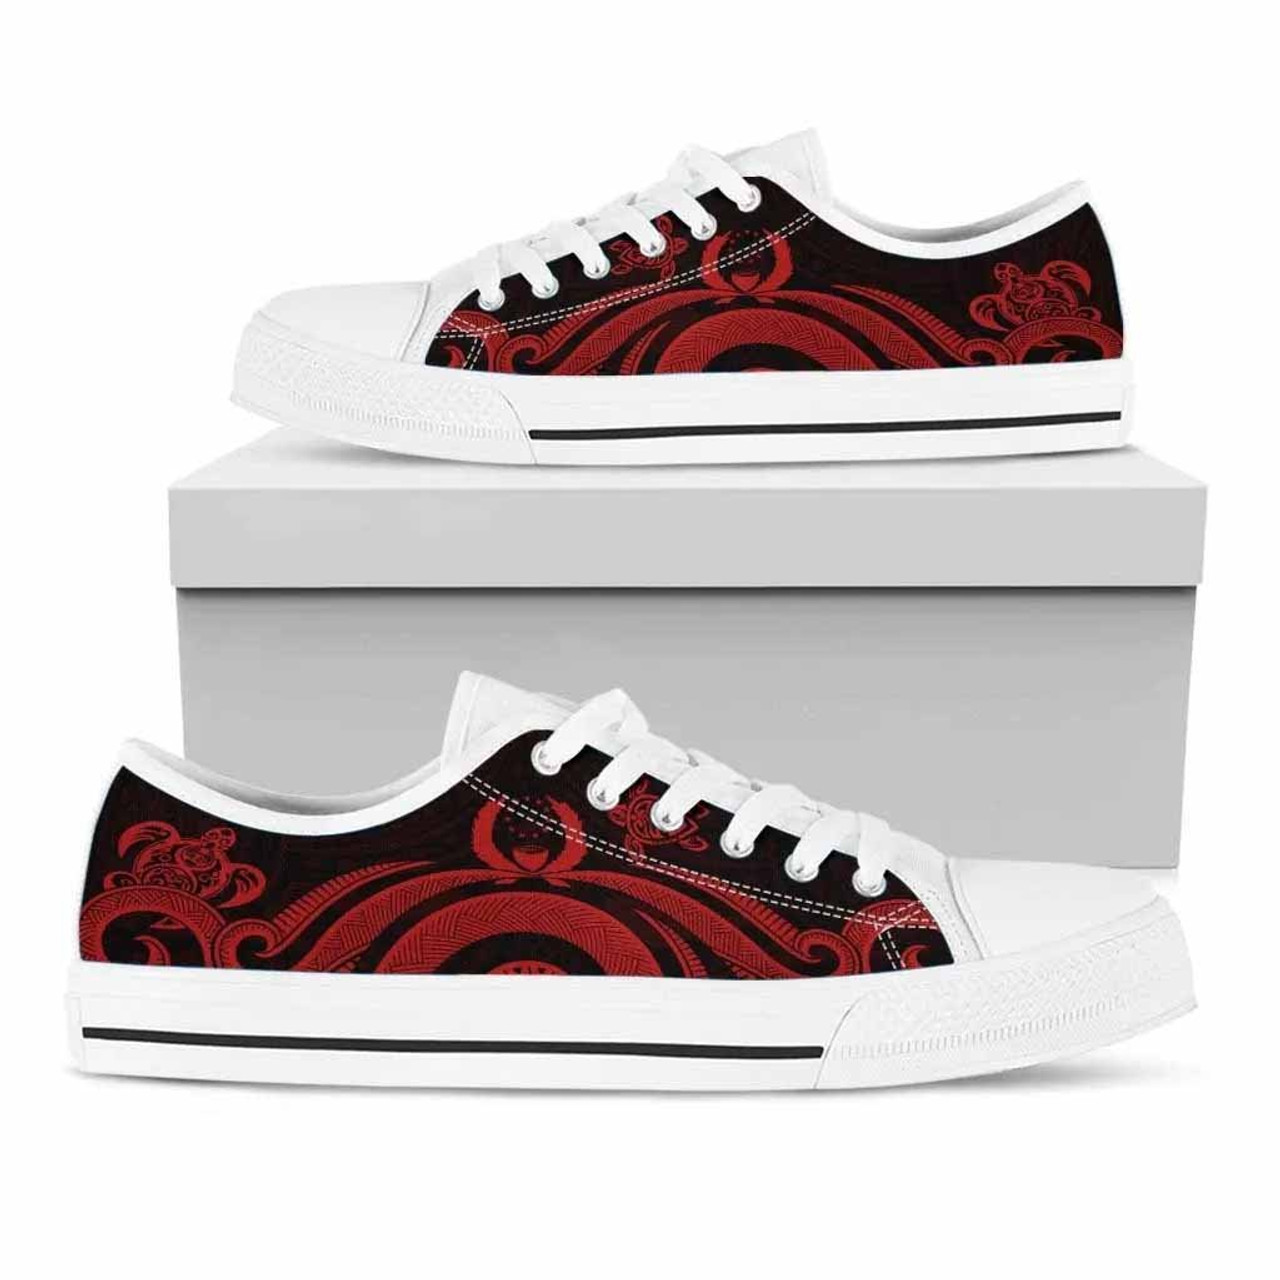 Pohnpei Low Top Canvas Shoes - Red Tentacle Turtle 6